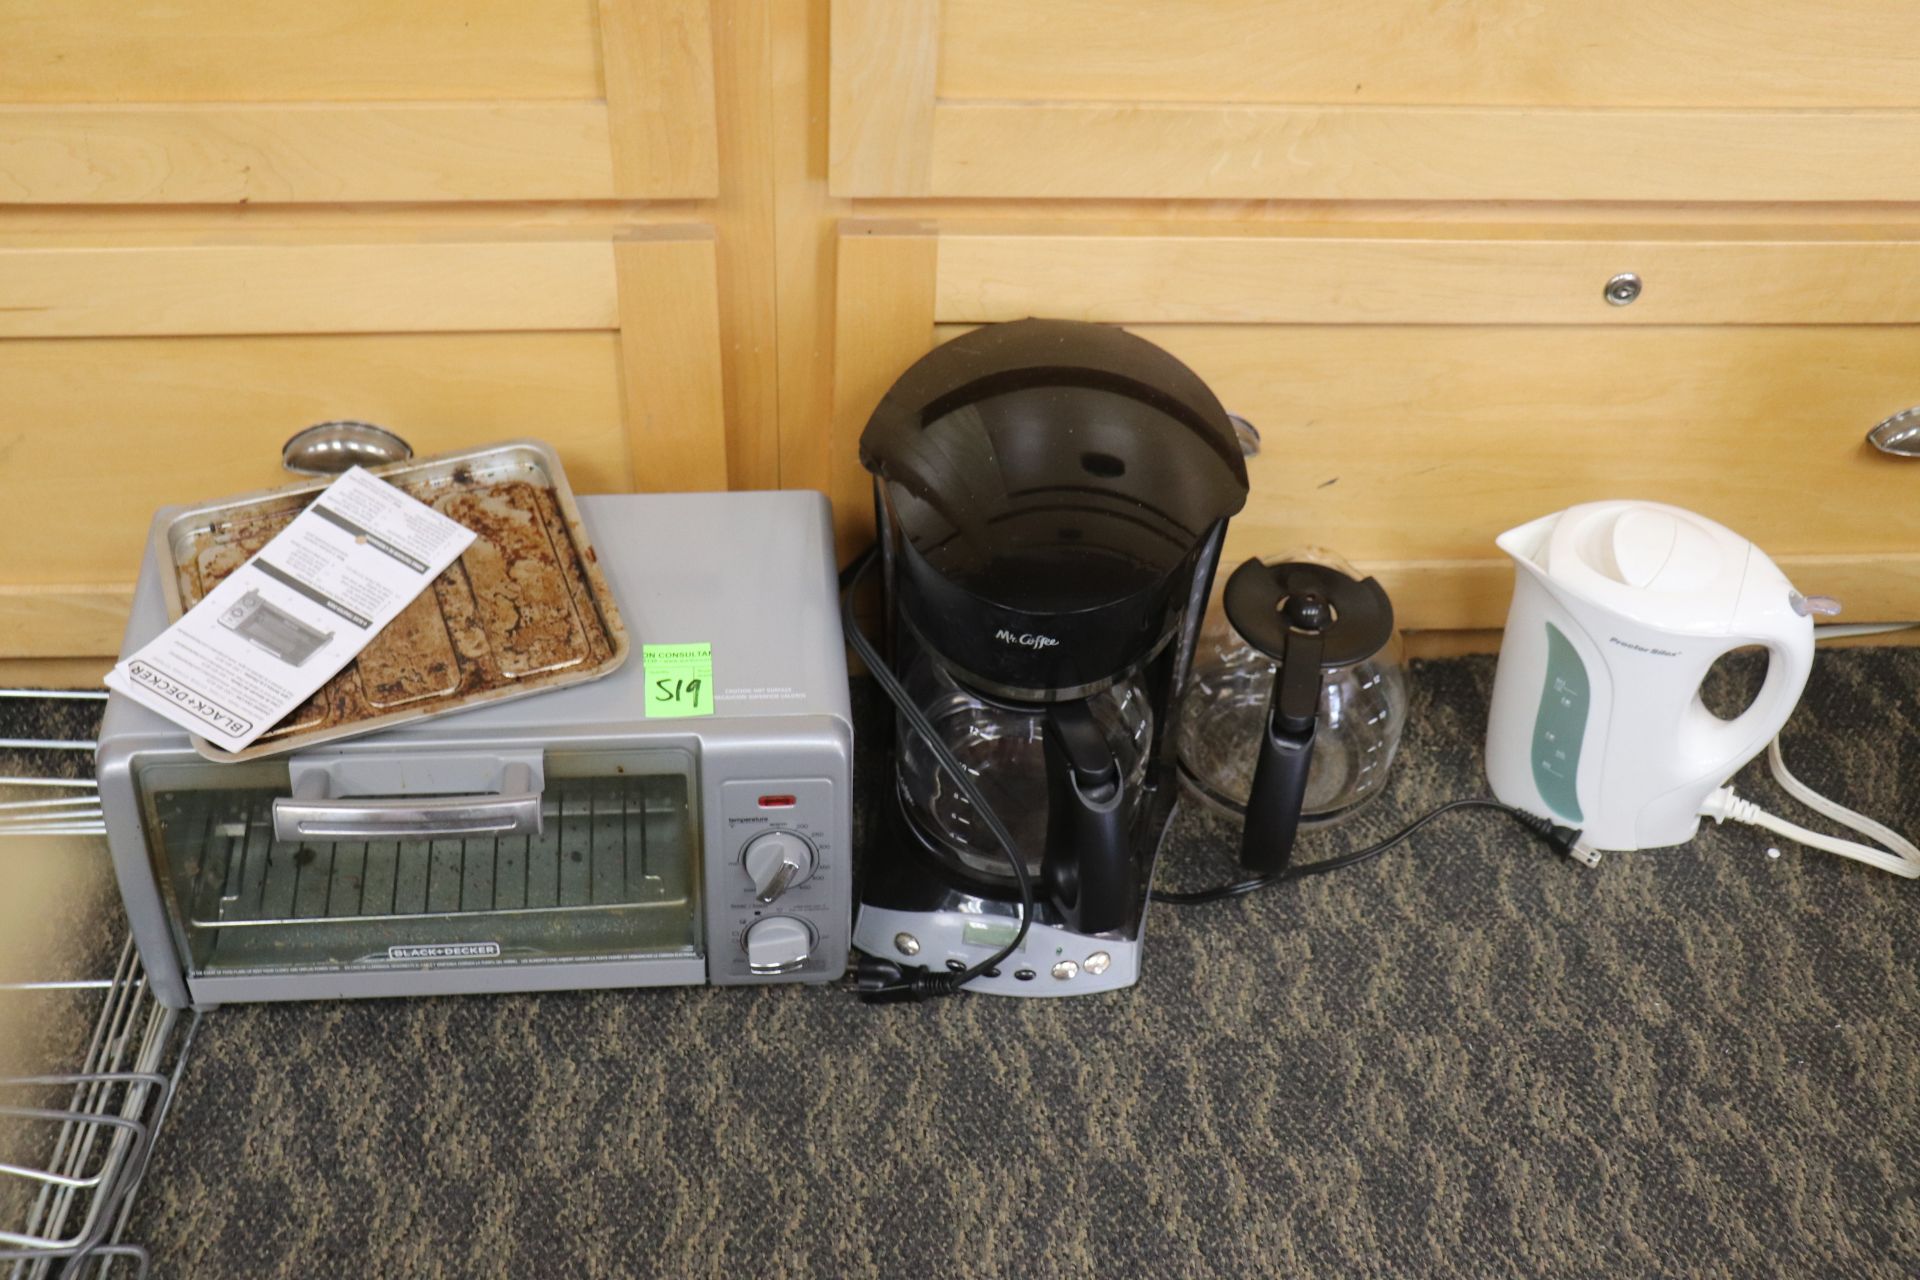 Black & Decker toaster oven and Mr. Coffee coffee machine and Procter Silex electric kettle